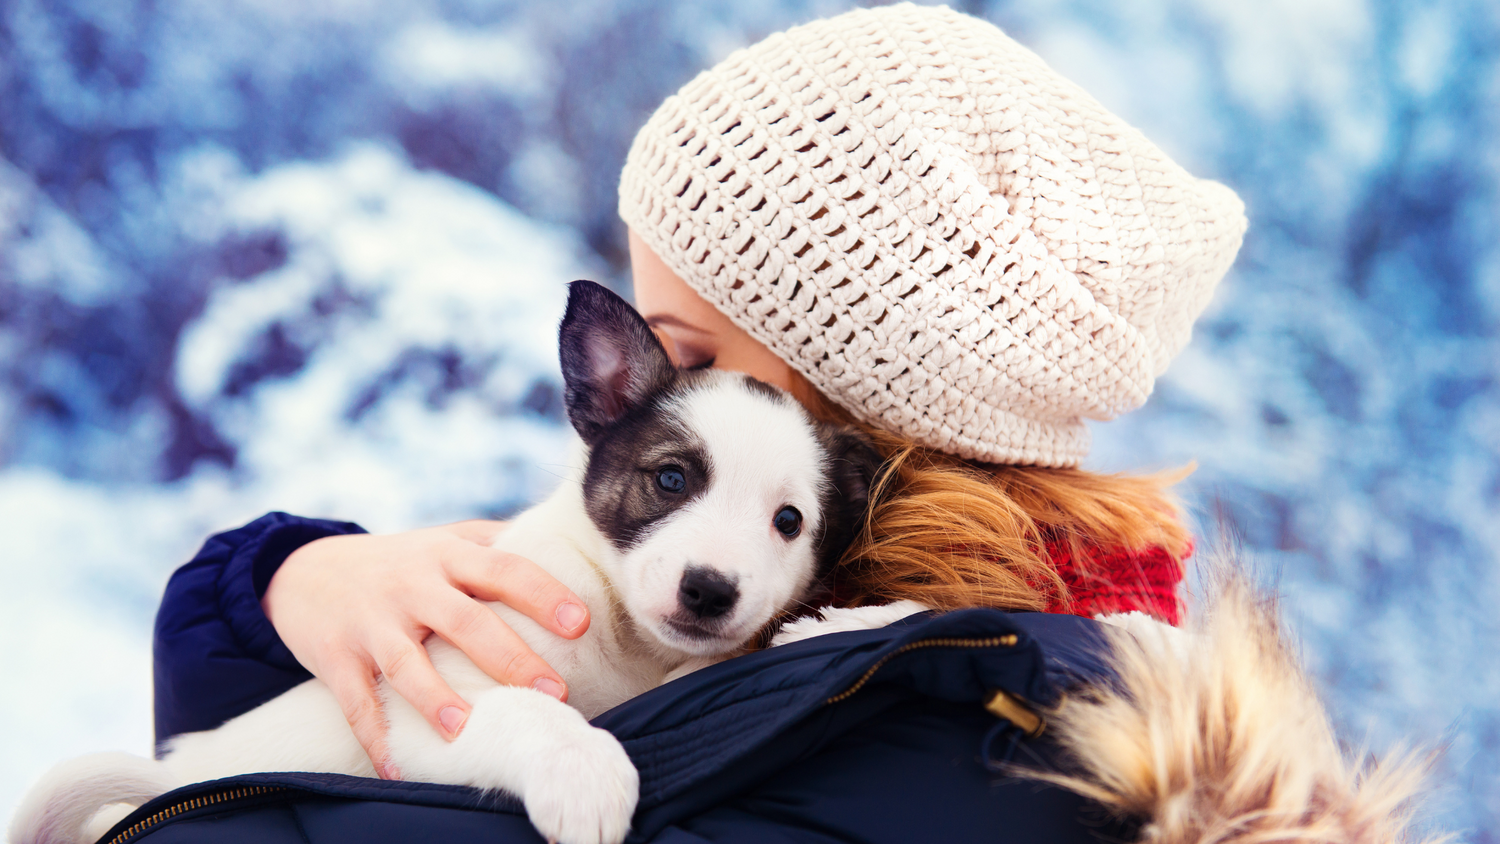 Pet-Friendly Snow Removal: What Options Are Out There?